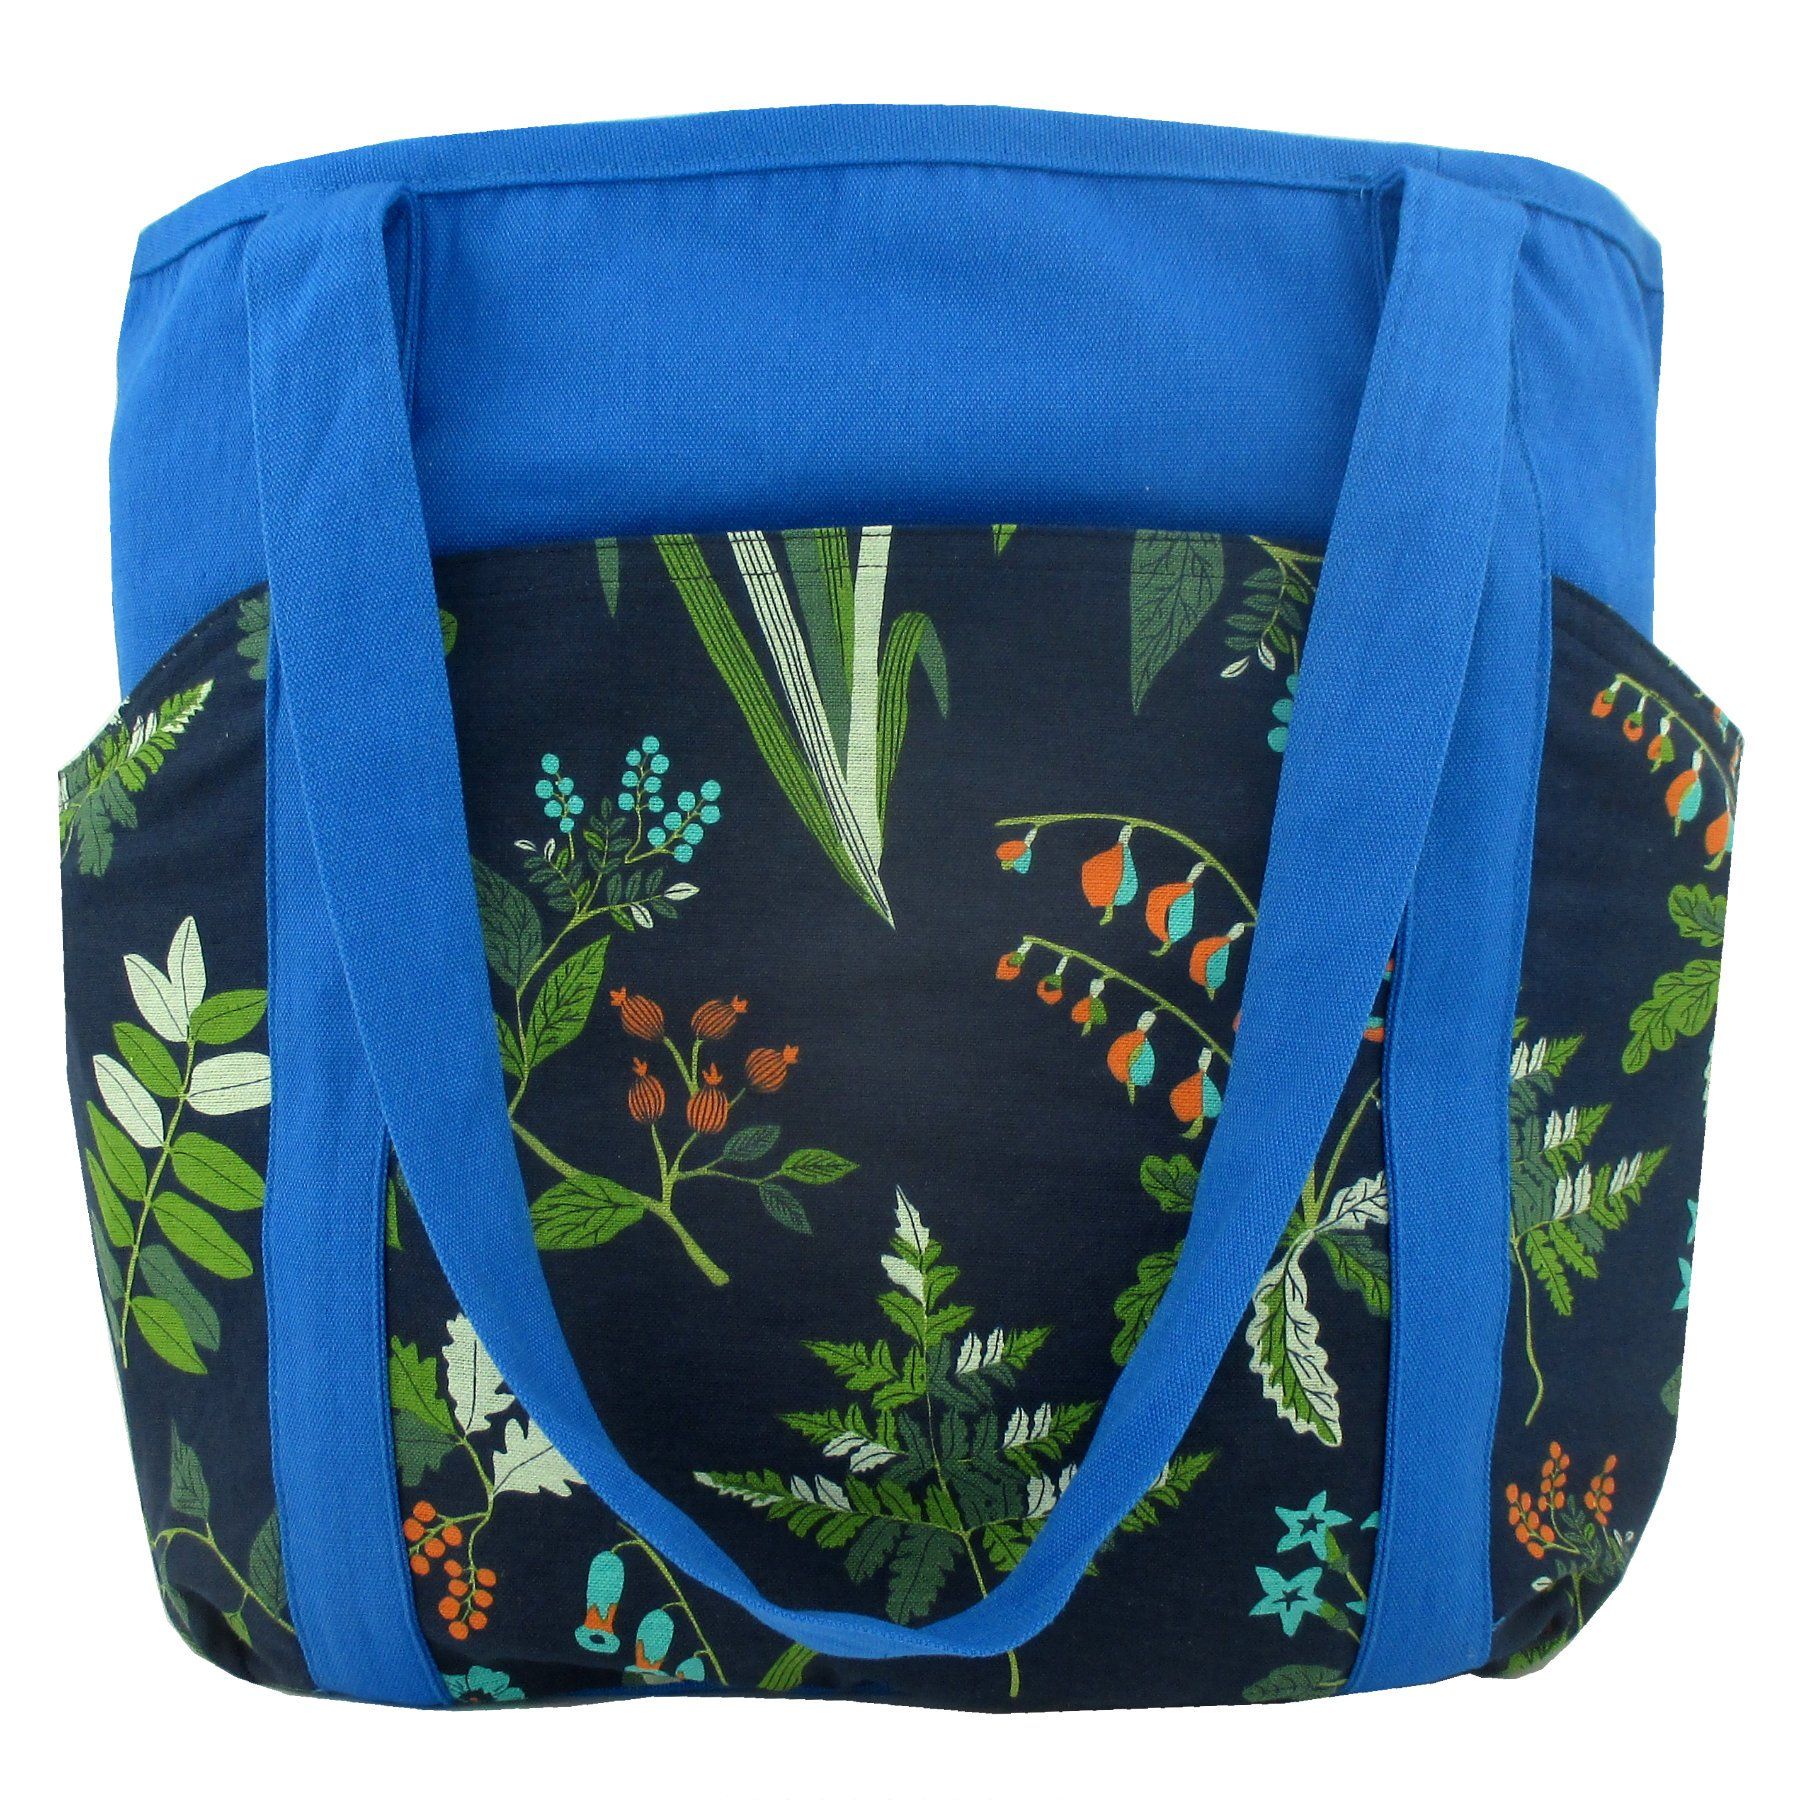 Blue Floral Plant Succulent Print Cotton Weekend :Tote Bag with Pockets